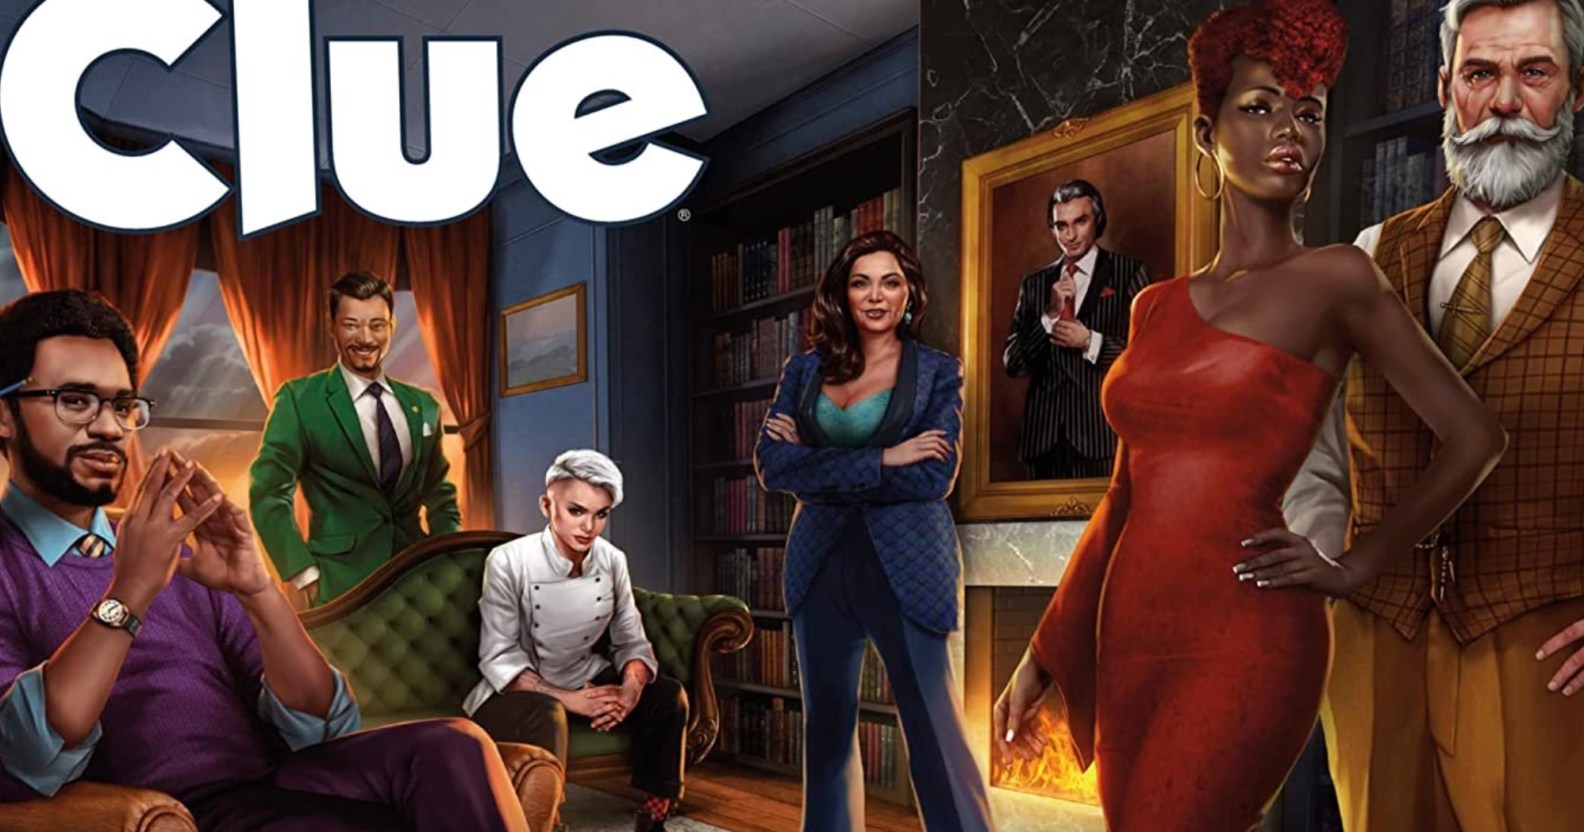 The Cluedo Board Game Has The Internet Abuzz. Hasbro ?w=1584&h=832&crop=1